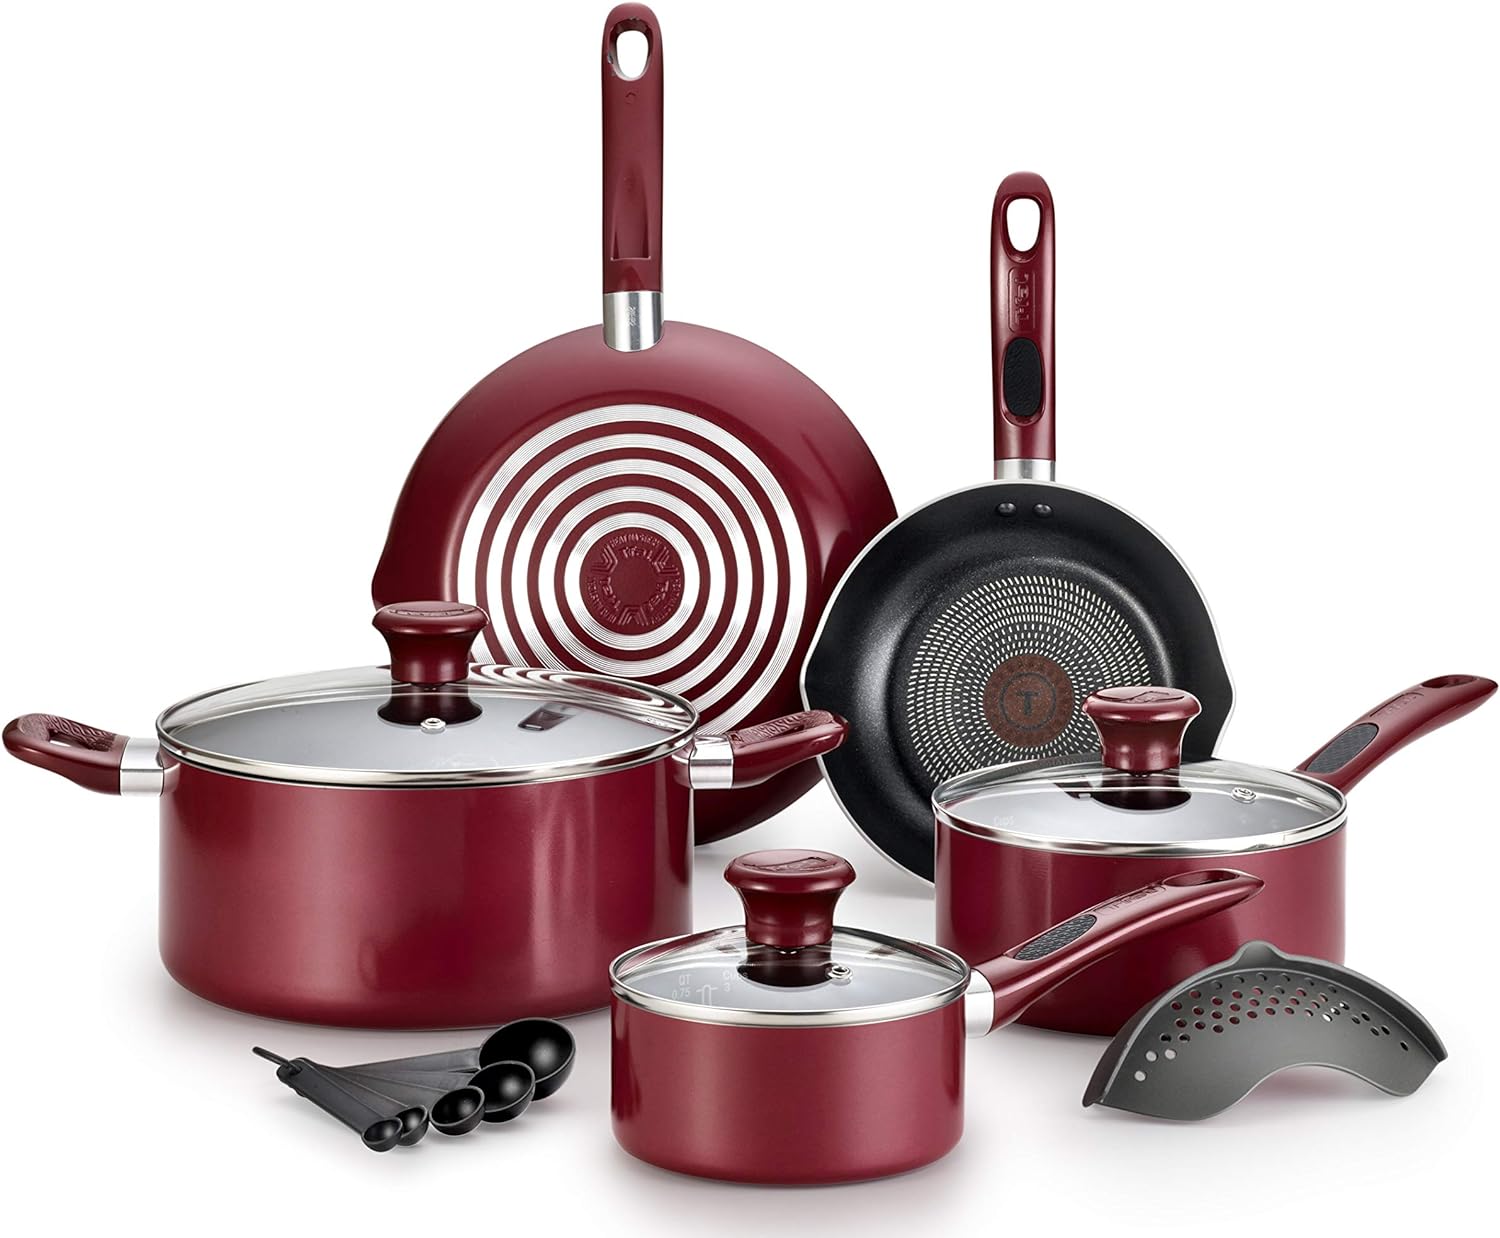 T-fal Excite ProGlide Nonstick Cookware Set Review